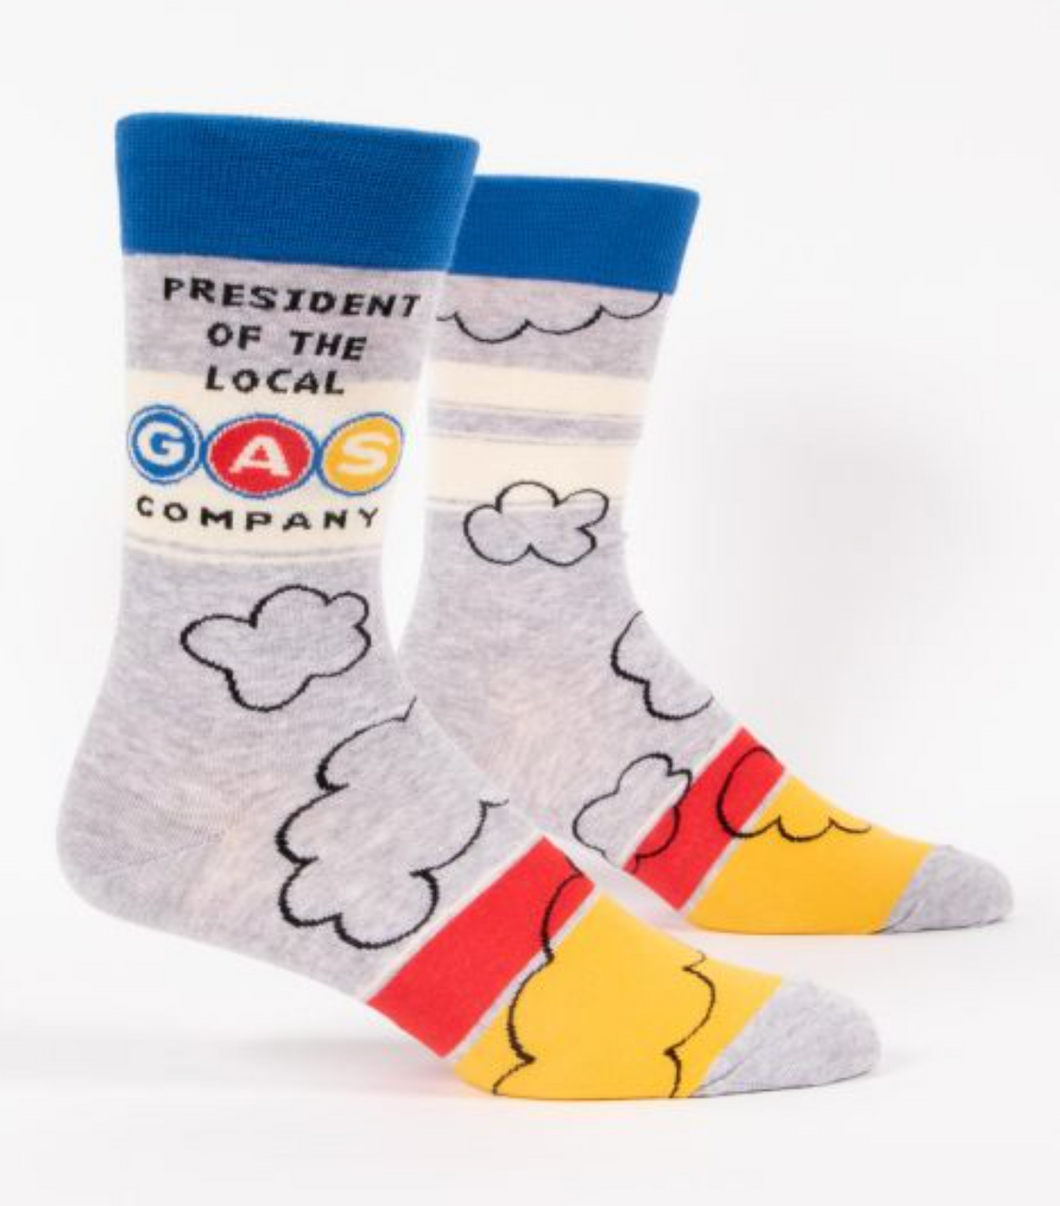 Blue Q Socks - President of the Local Gas Company